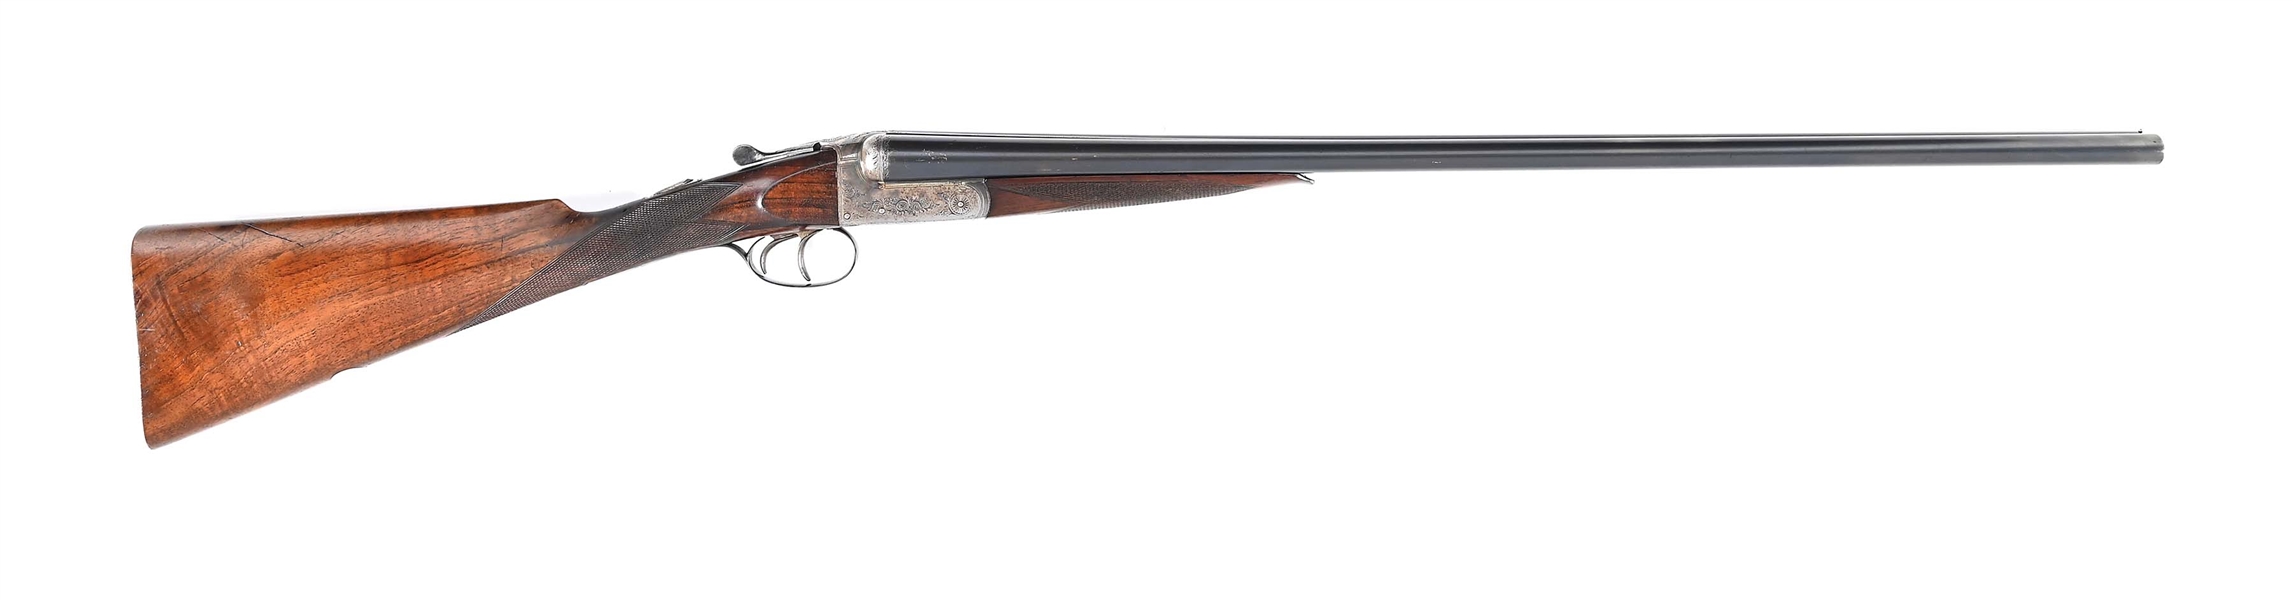 (C) ENGLISH 20 BORE BOXLOCK SIDE BY SIDE SHOTGUN BY ROGERS.